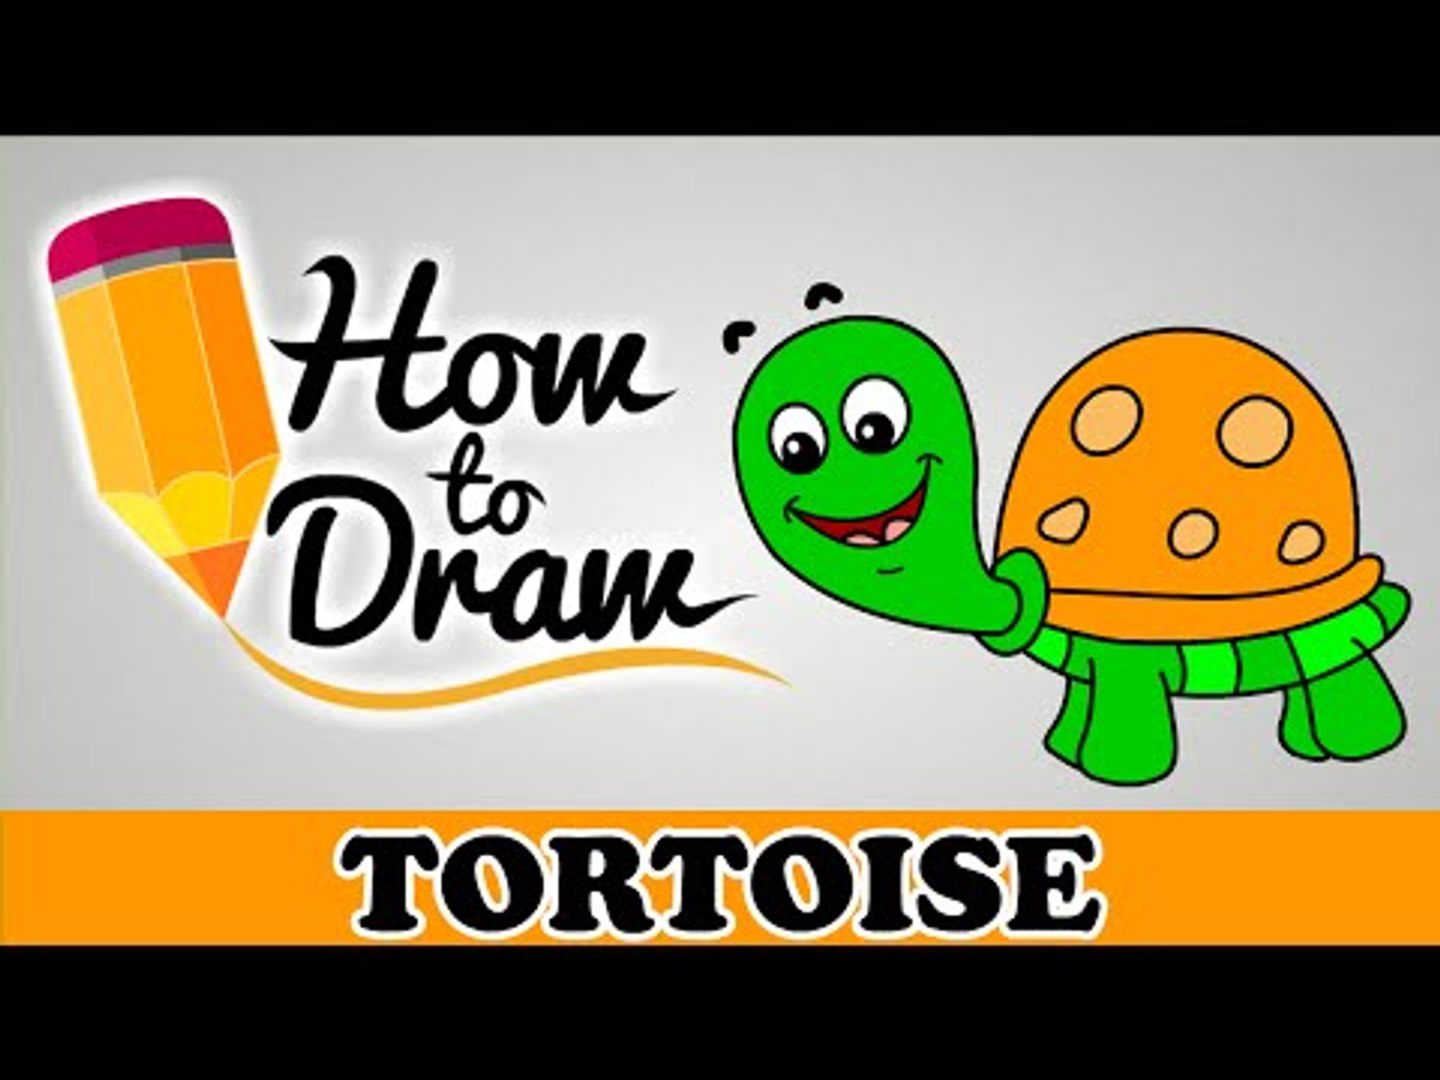 How To Draw A Tortoise - Easy Step By Step Cartoon Art Drawing Lesson  Tutorial For Kids & Beginners - video Dailymotion